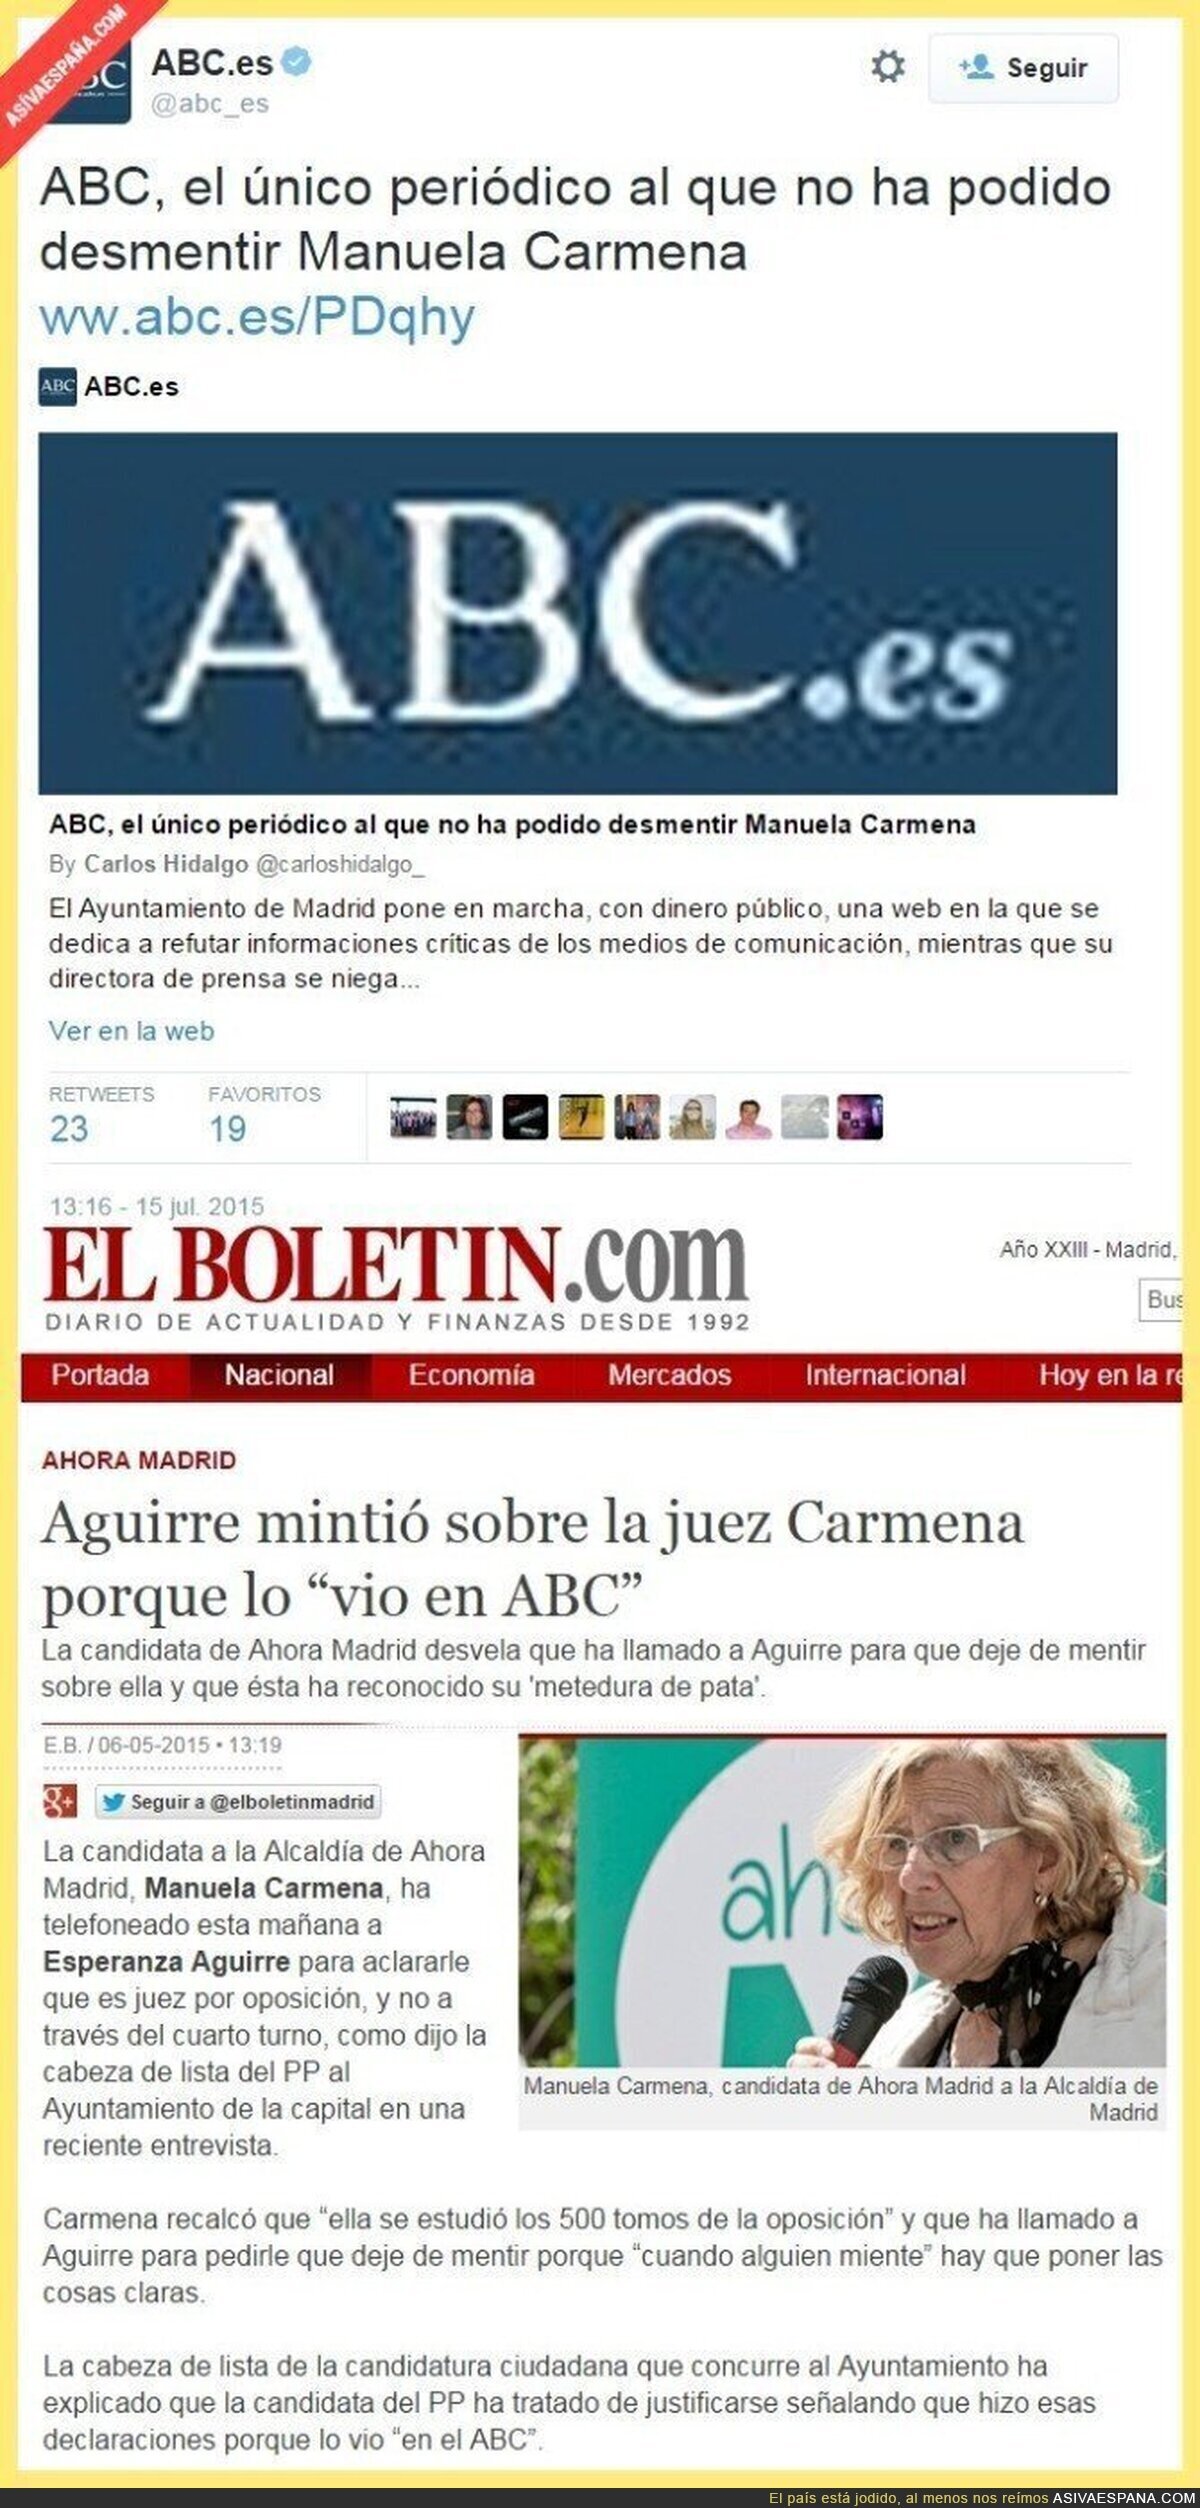 Cinismo made in ABC